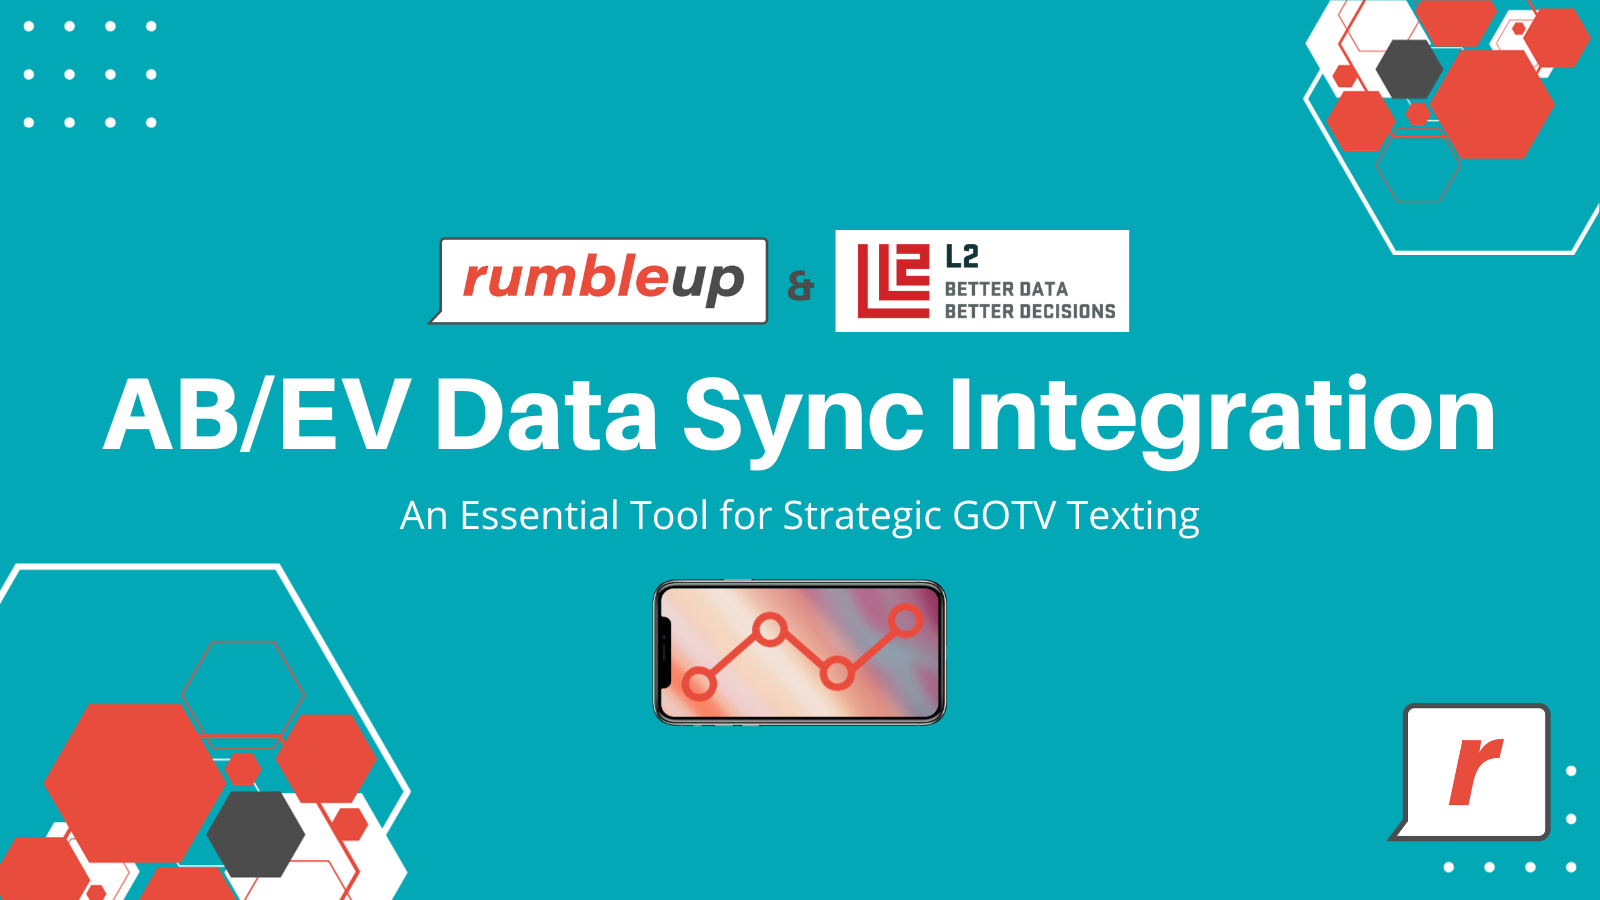 Introducing ABEV Data Sync The Essential GOTV Texting Tool from RumbleUp and L2